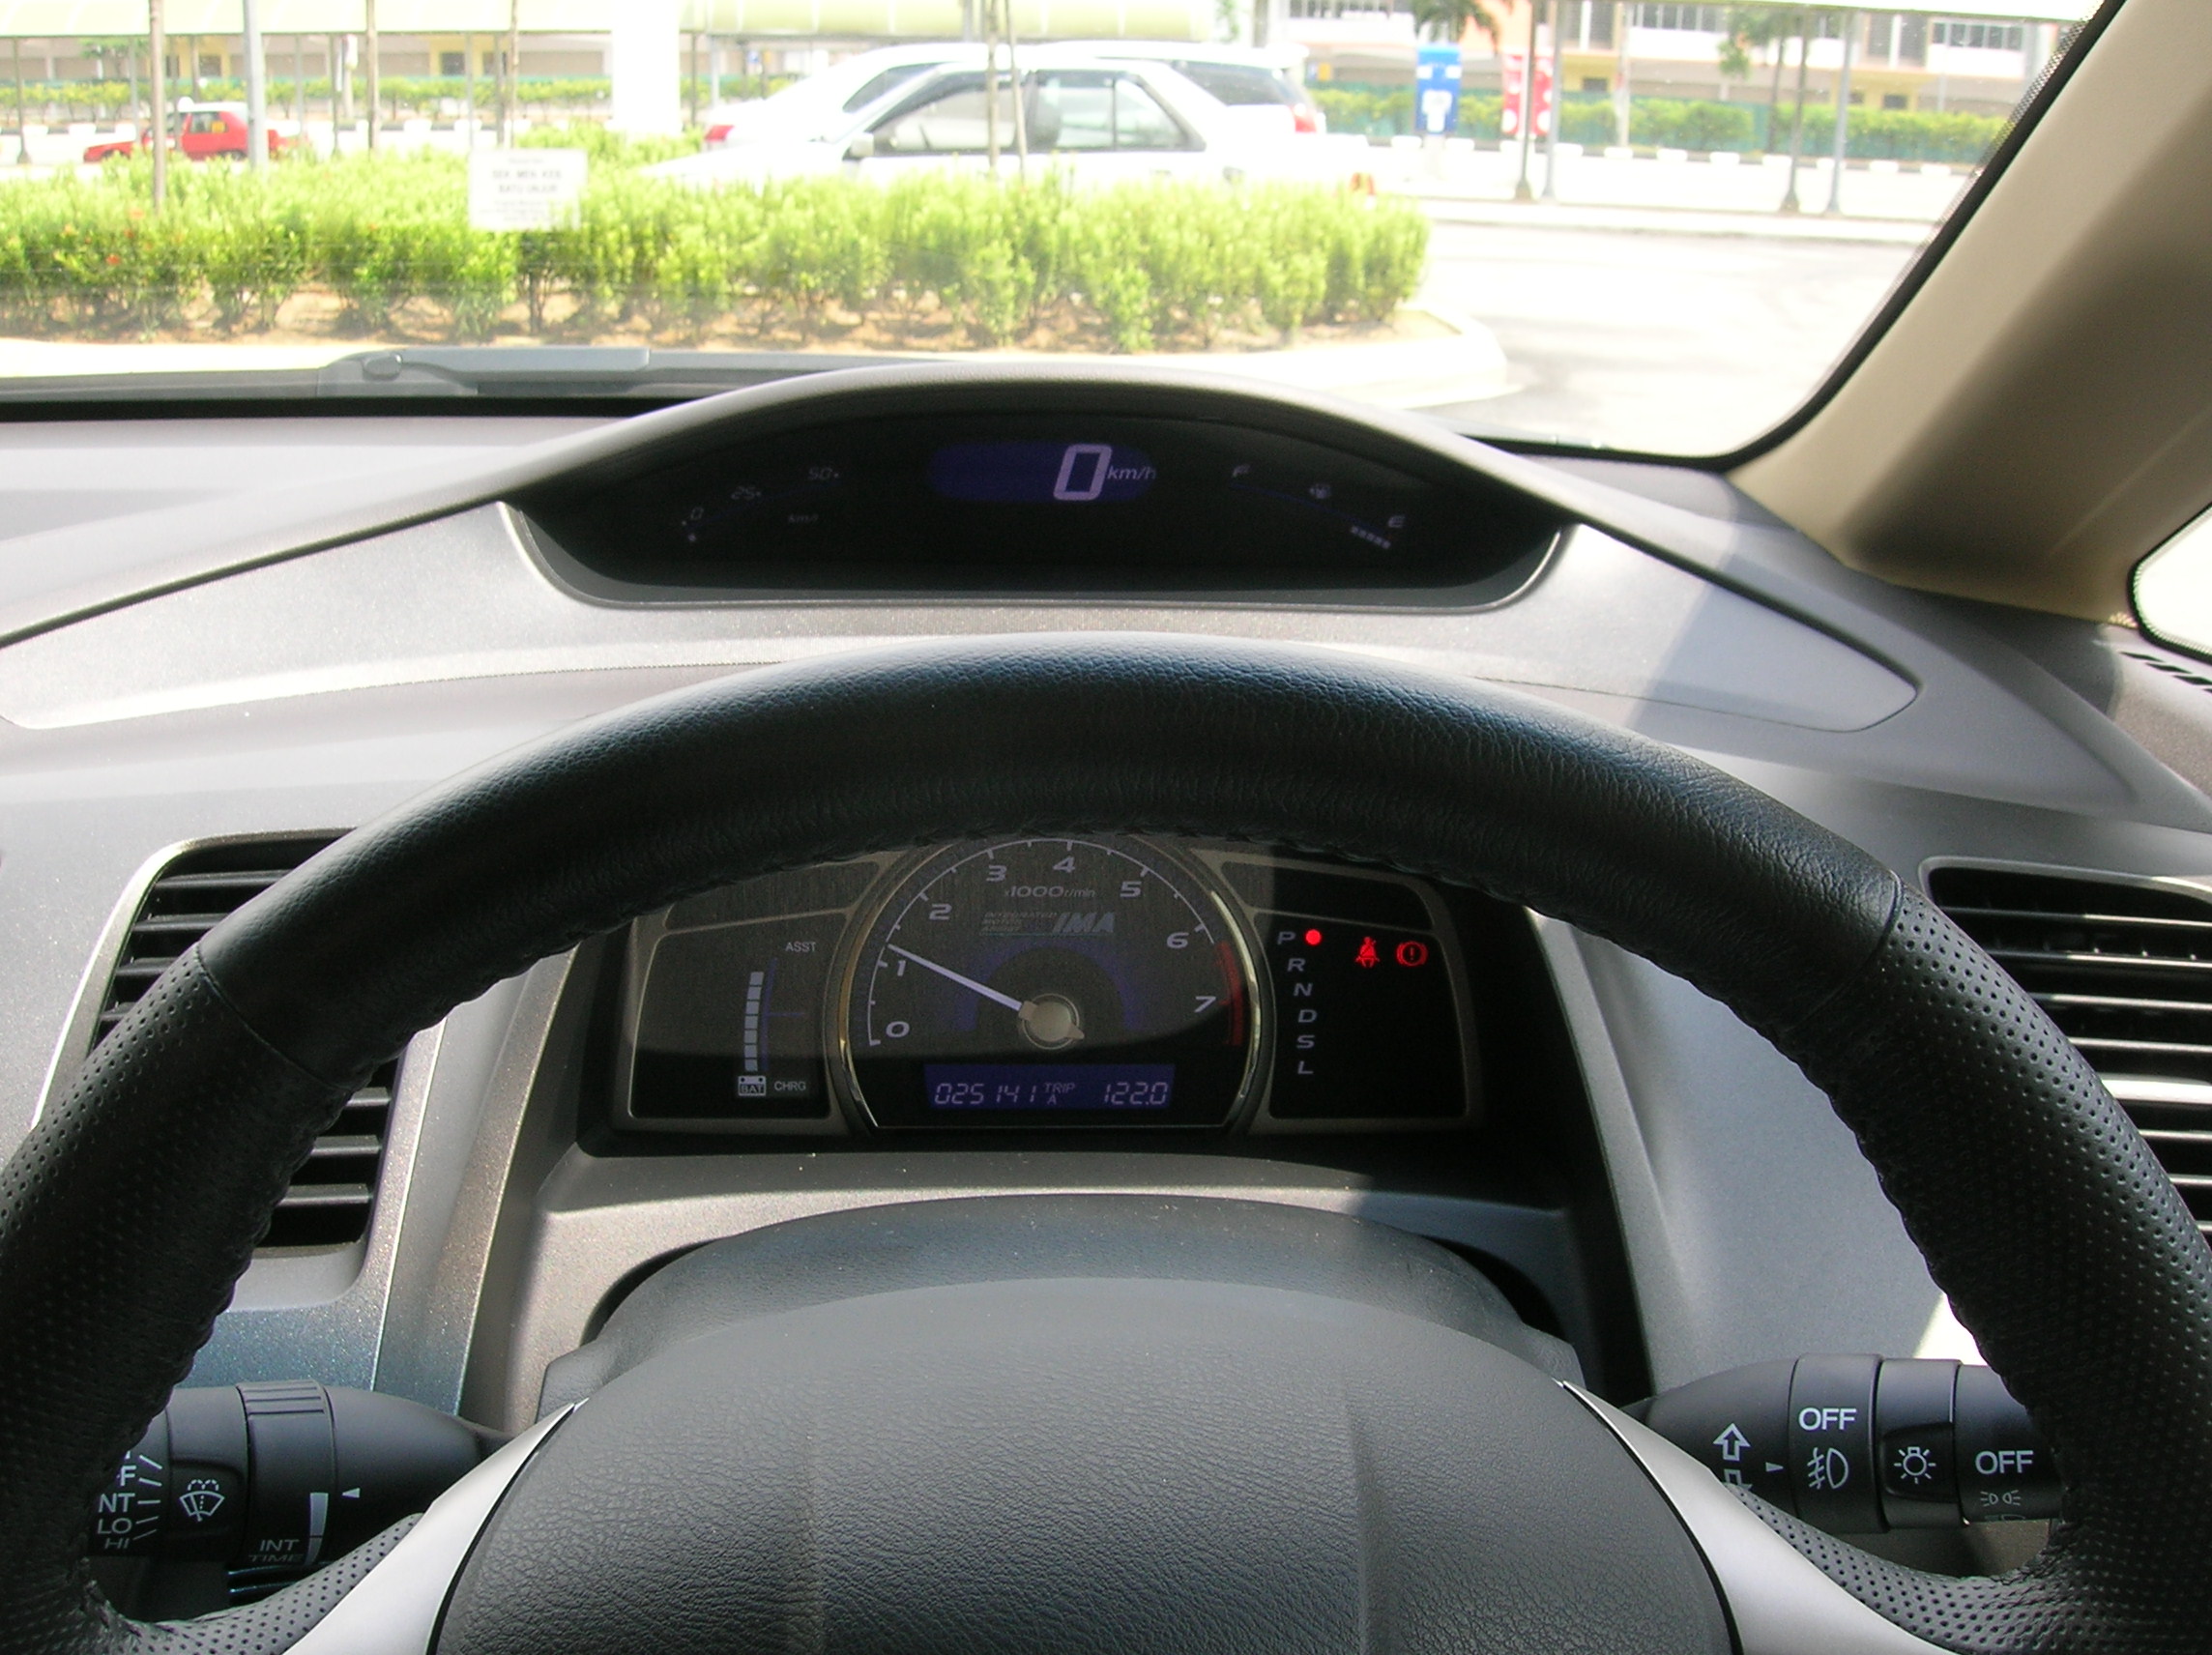 Two tiered instrument cluster.